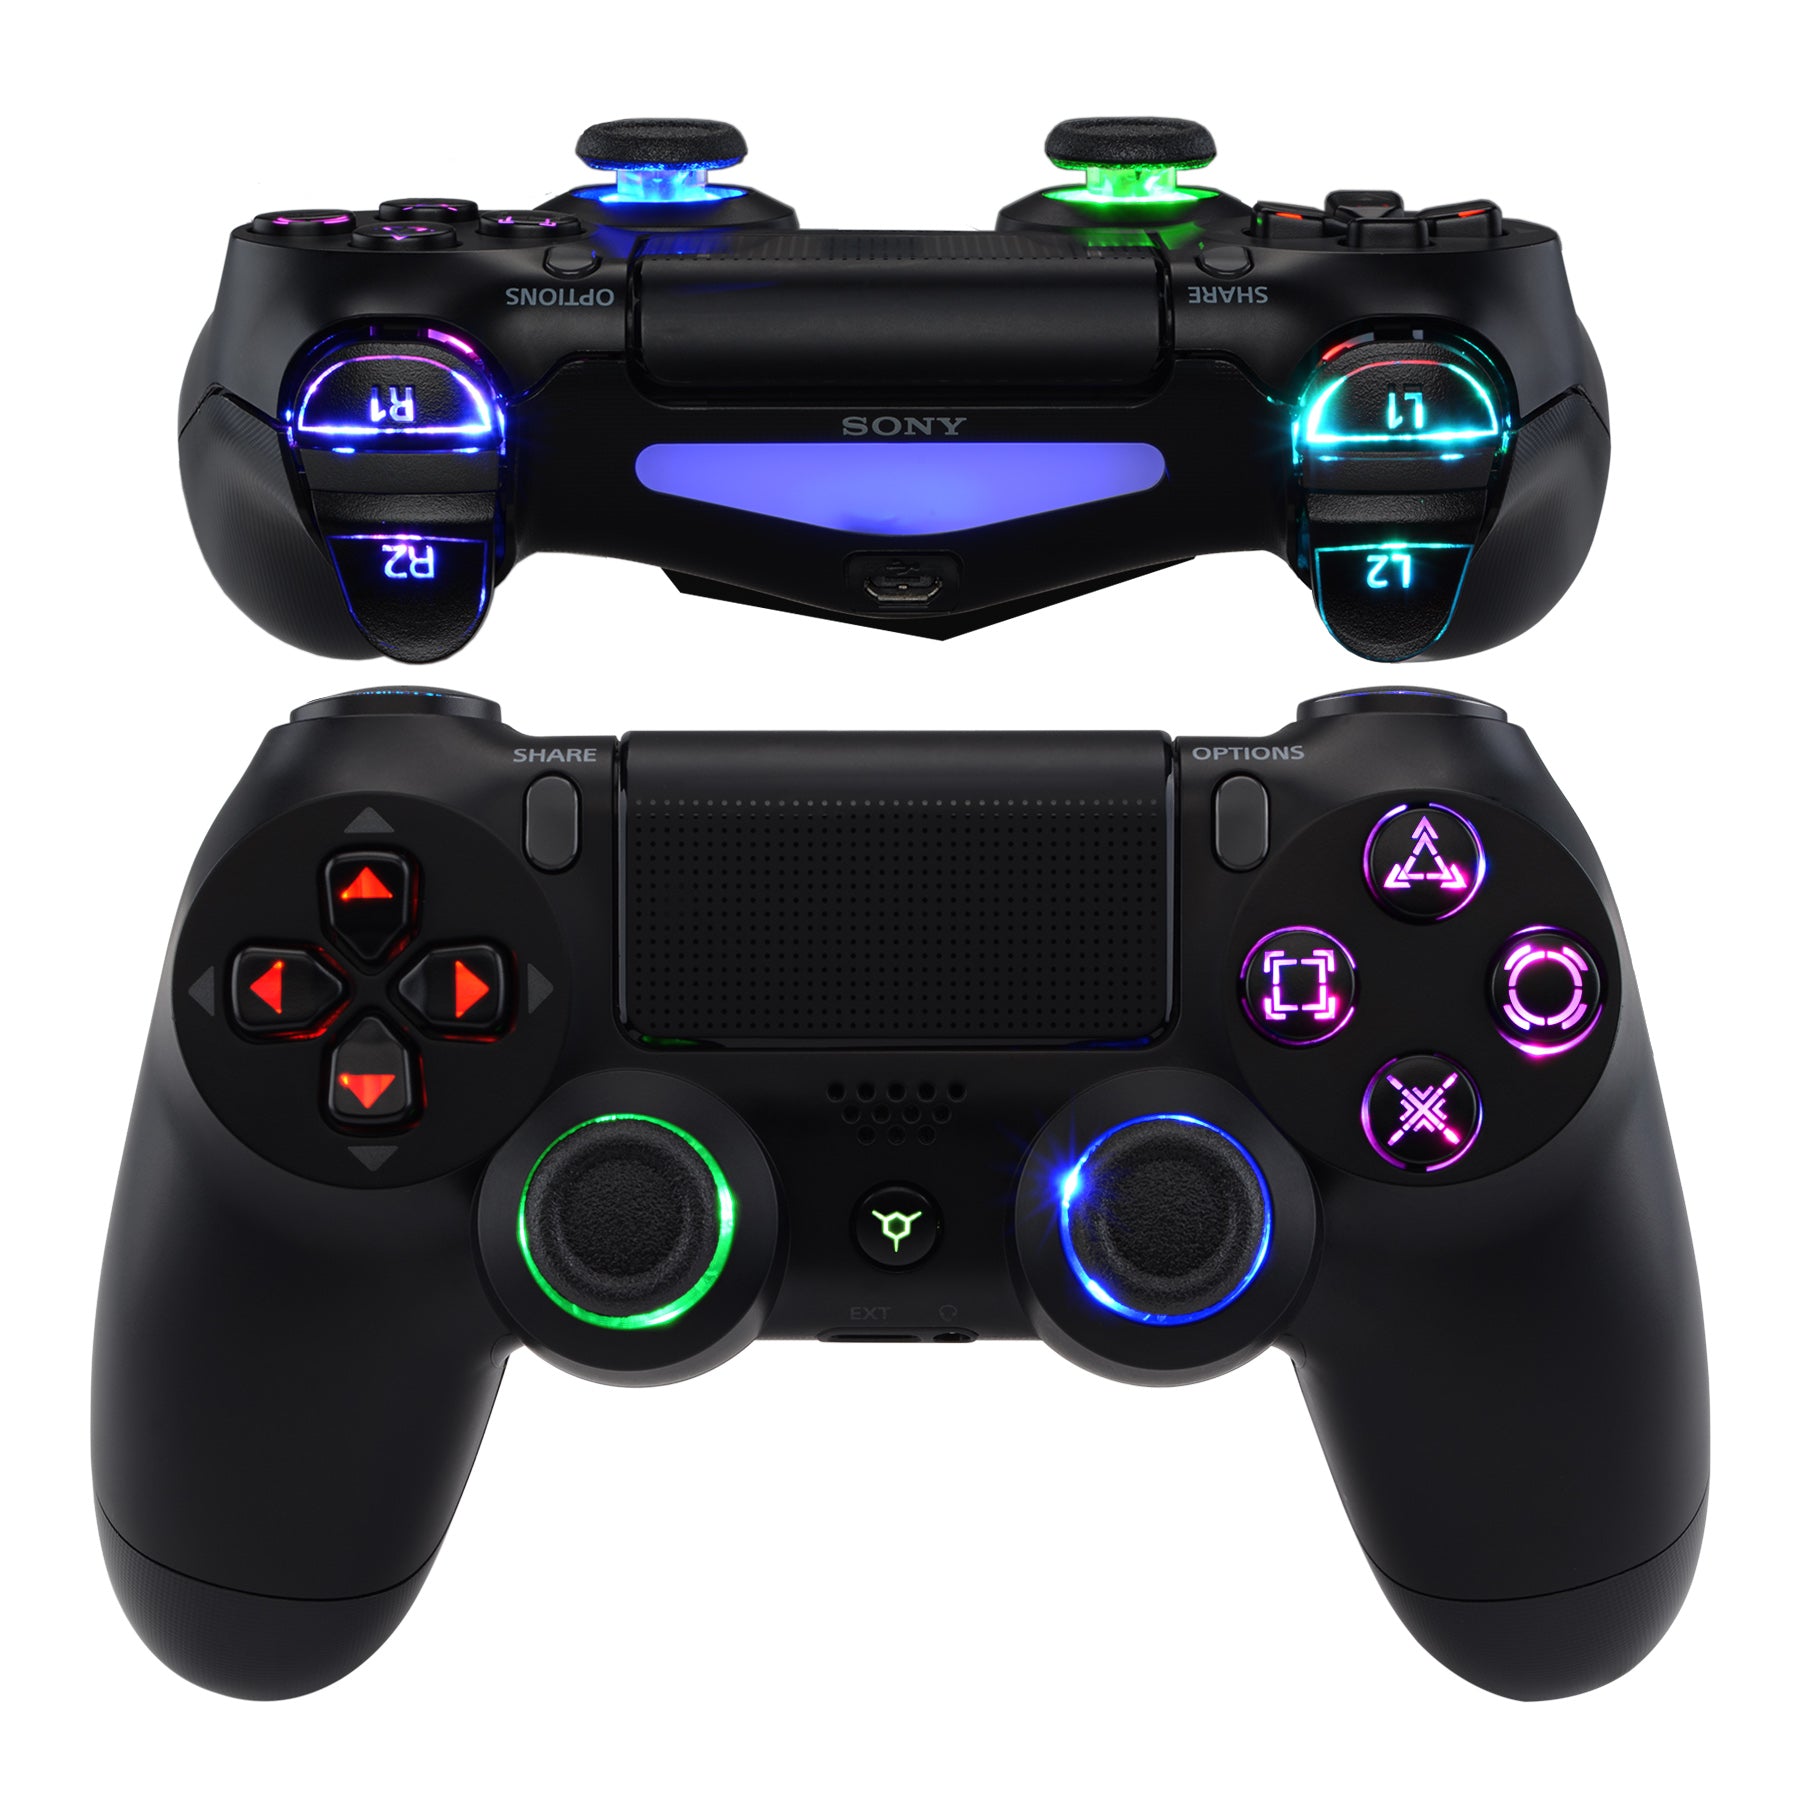 Luminated D-pad Thumbstick L1 R1 R2 L2 Home Face Buttons – Retail